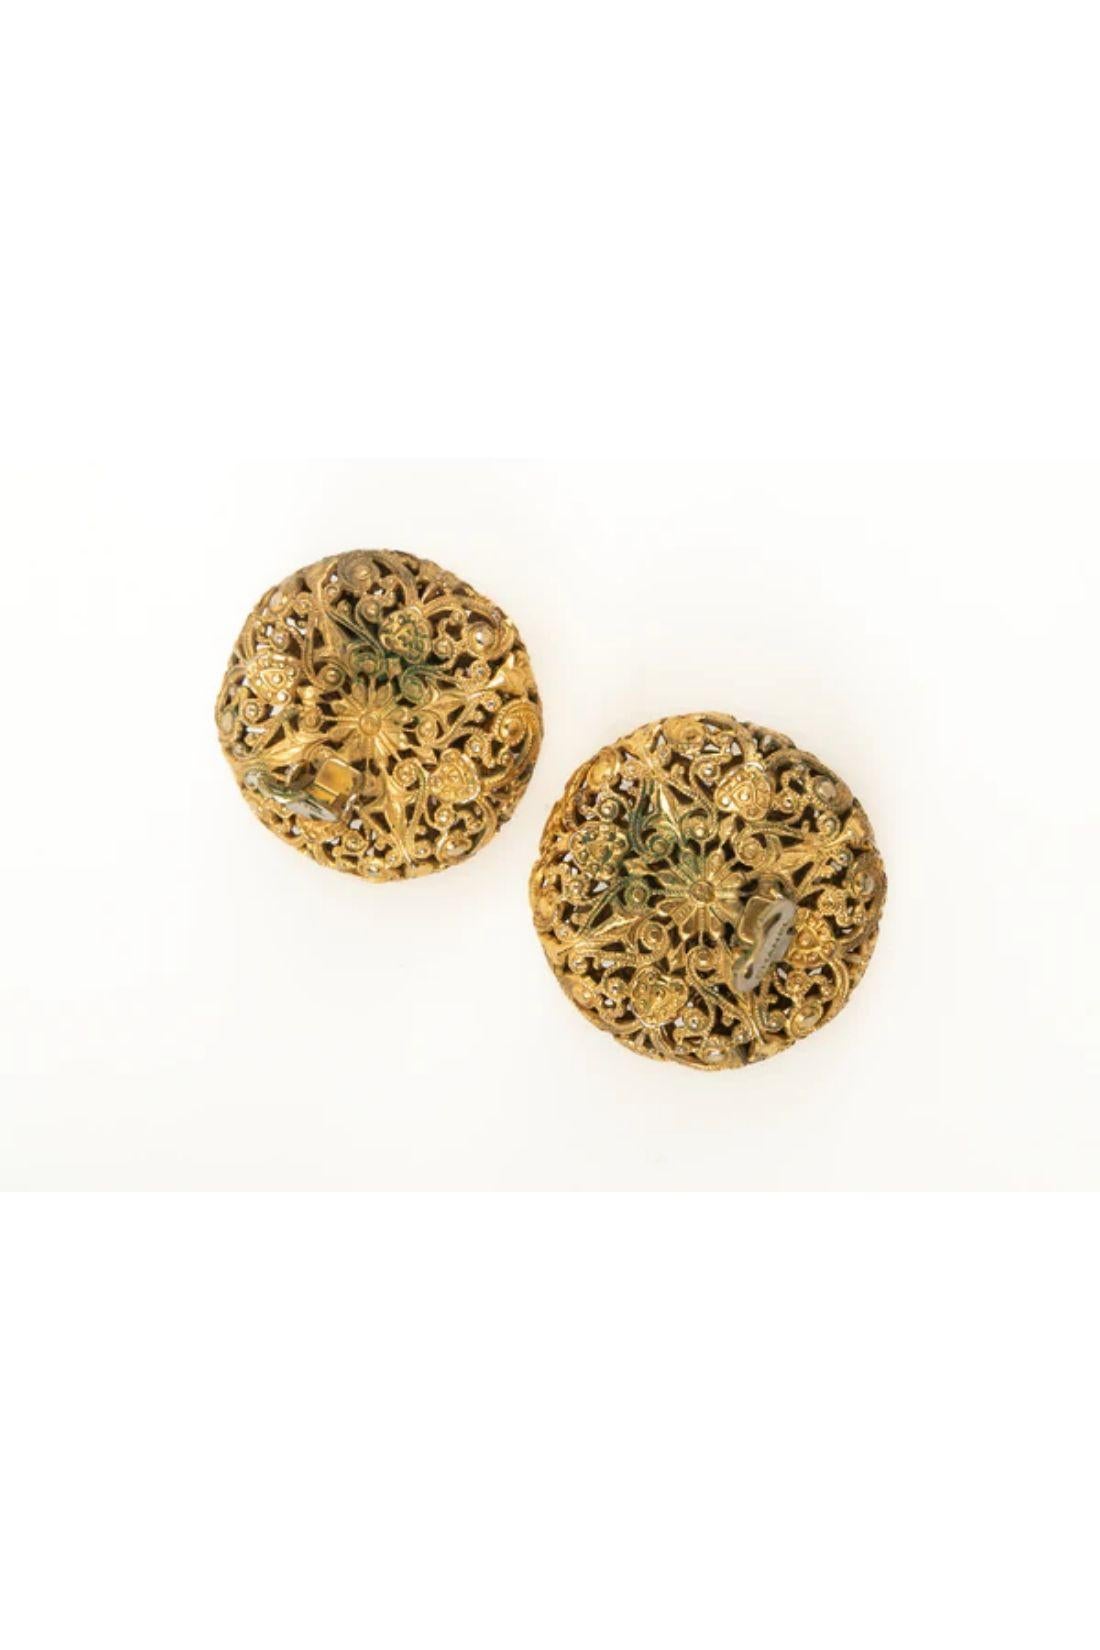 Women's Chanel Earrings in Gold-Plated Metal with Pearly Glass Cabochons For Sale